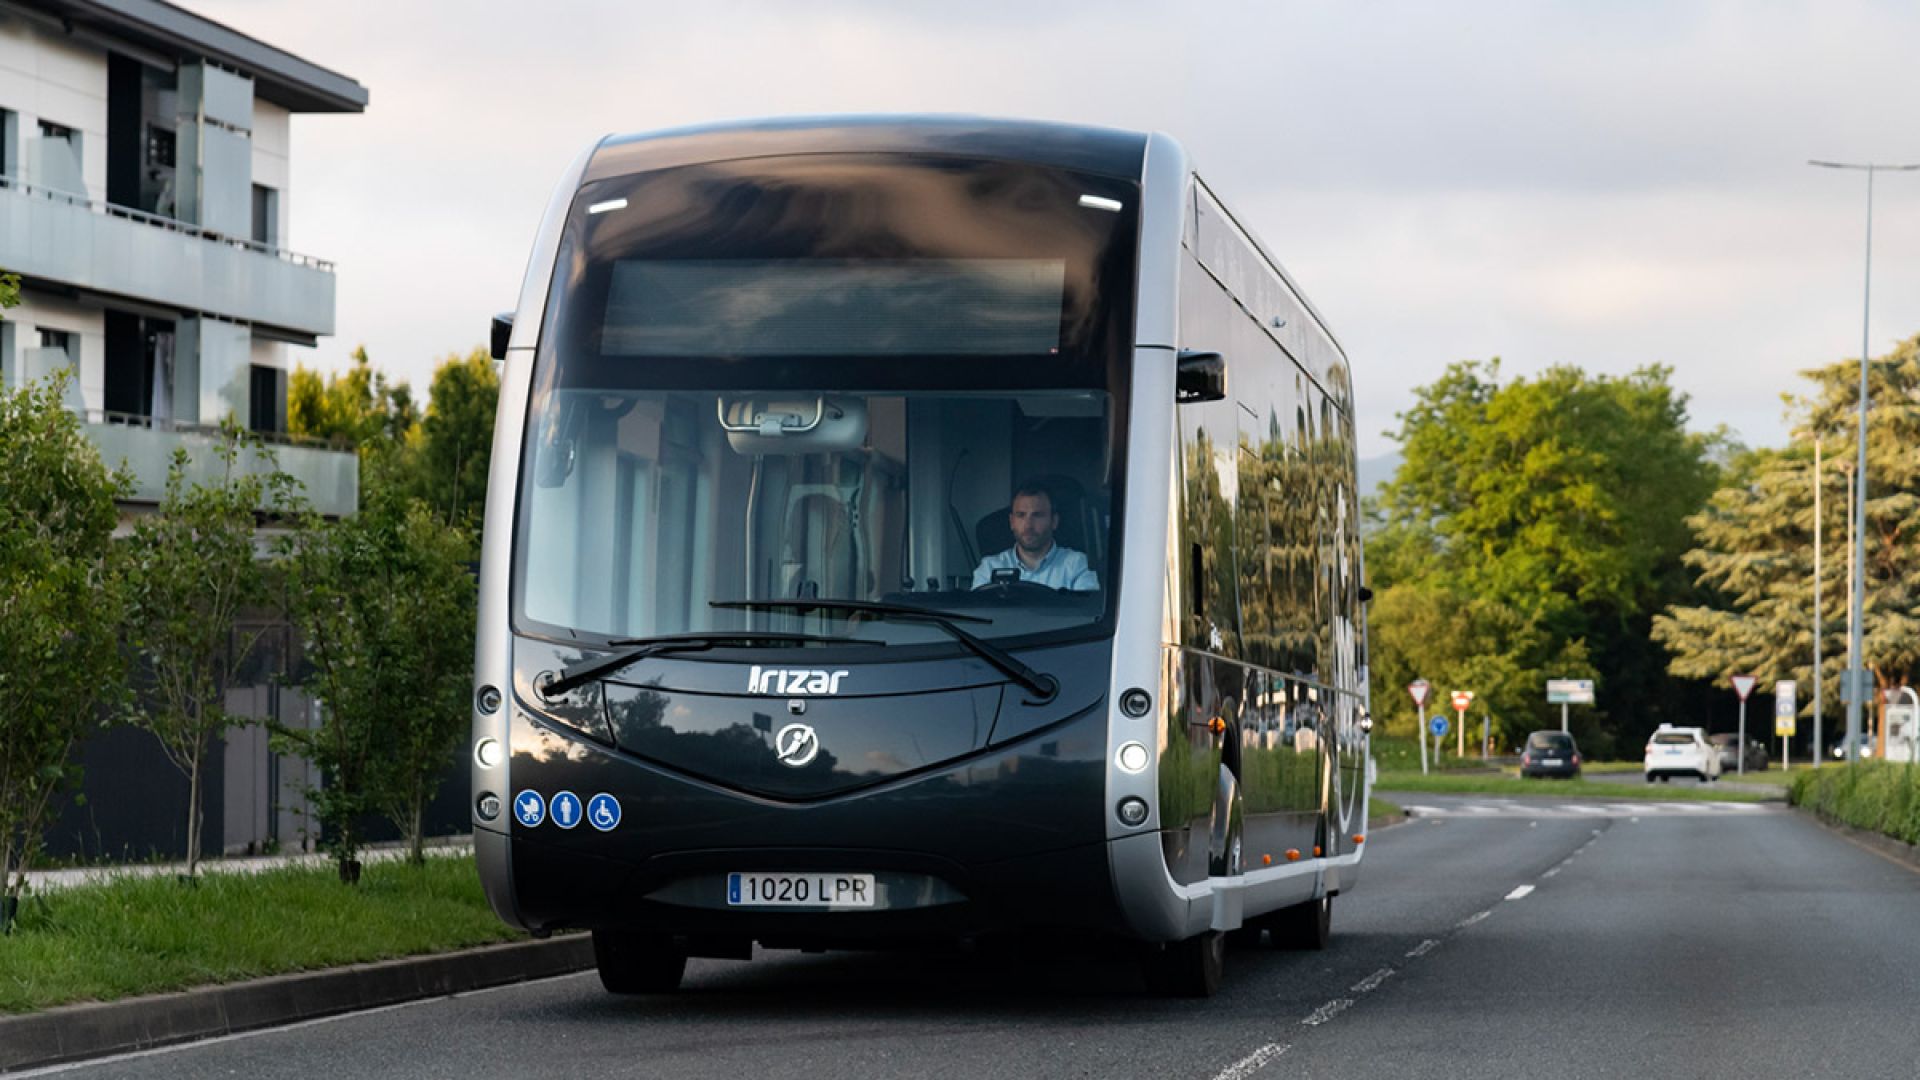 The region of Pamplona will have 20 new zero-emissions buses from Irizar e-mobility